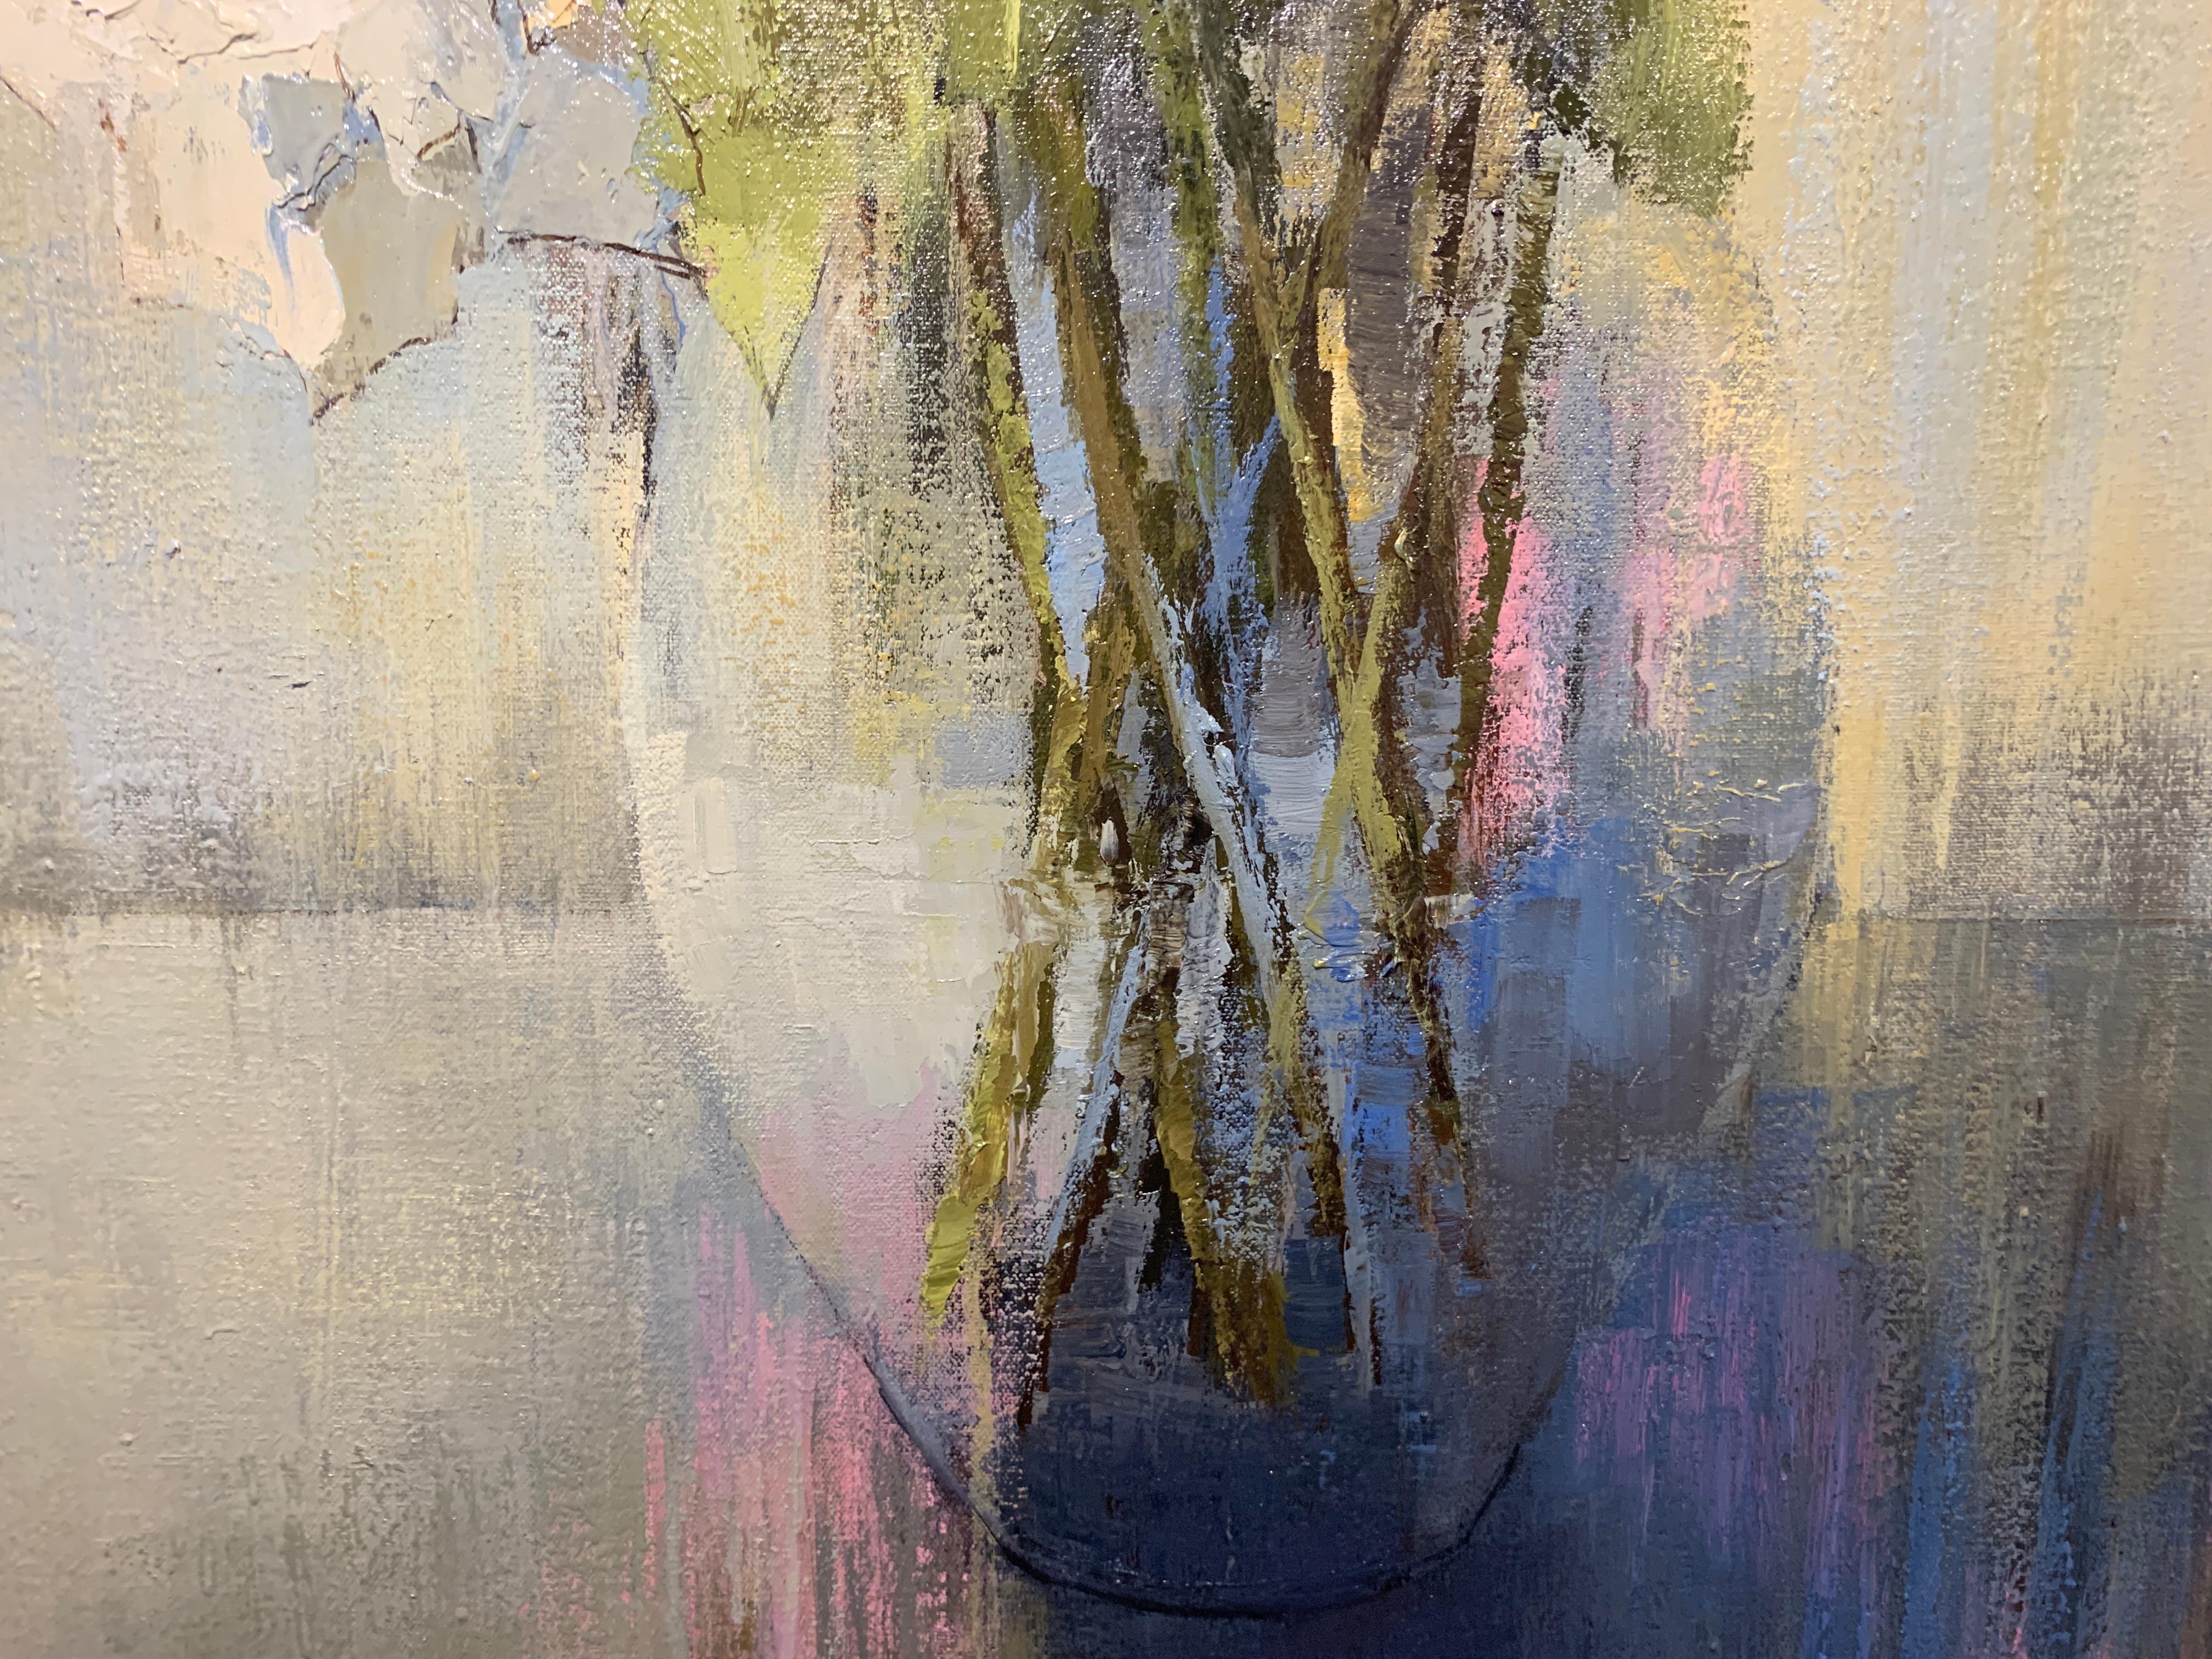 'Ladies of Sophistication' is an American Impressionist floral oil on canvas painting created by Angela Nesbit in 2019. Going to the essentials, the artist depicted a bouquet of white flowers, resting in a simple glass vase. With a loose stroke and